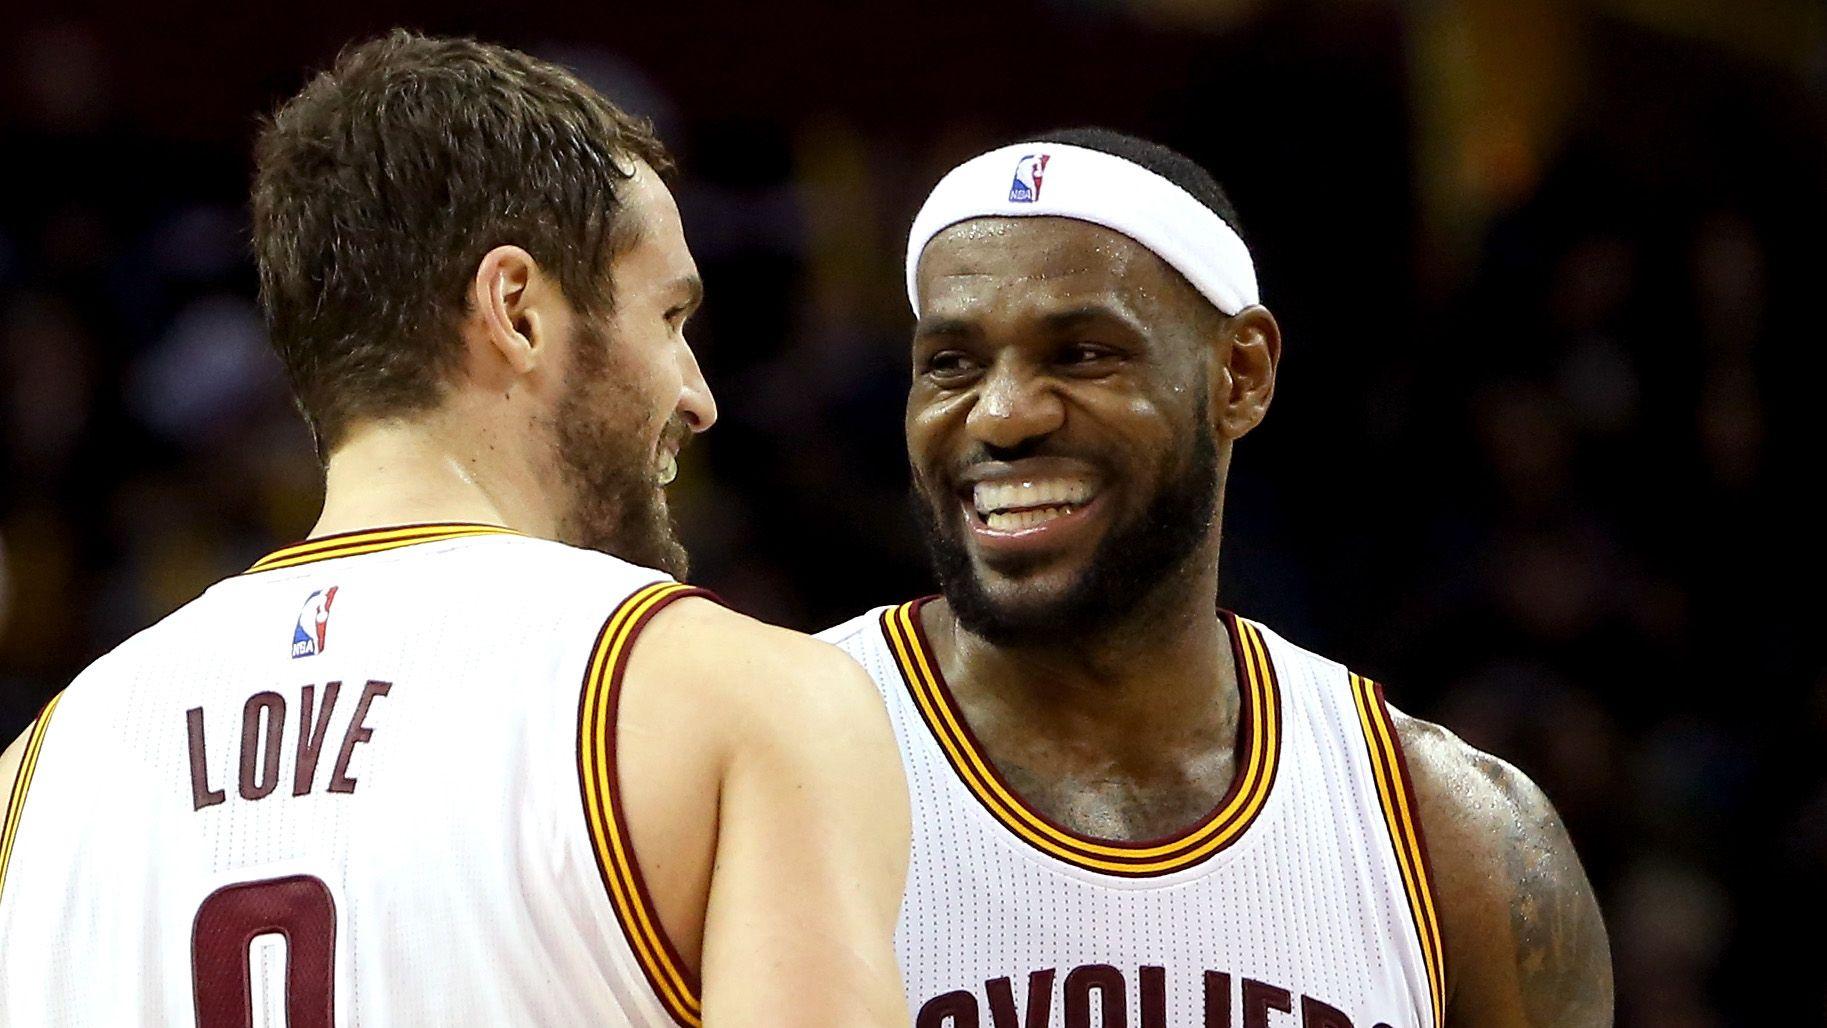 LeBron James roasts Kevin Love's shoes one Twitter